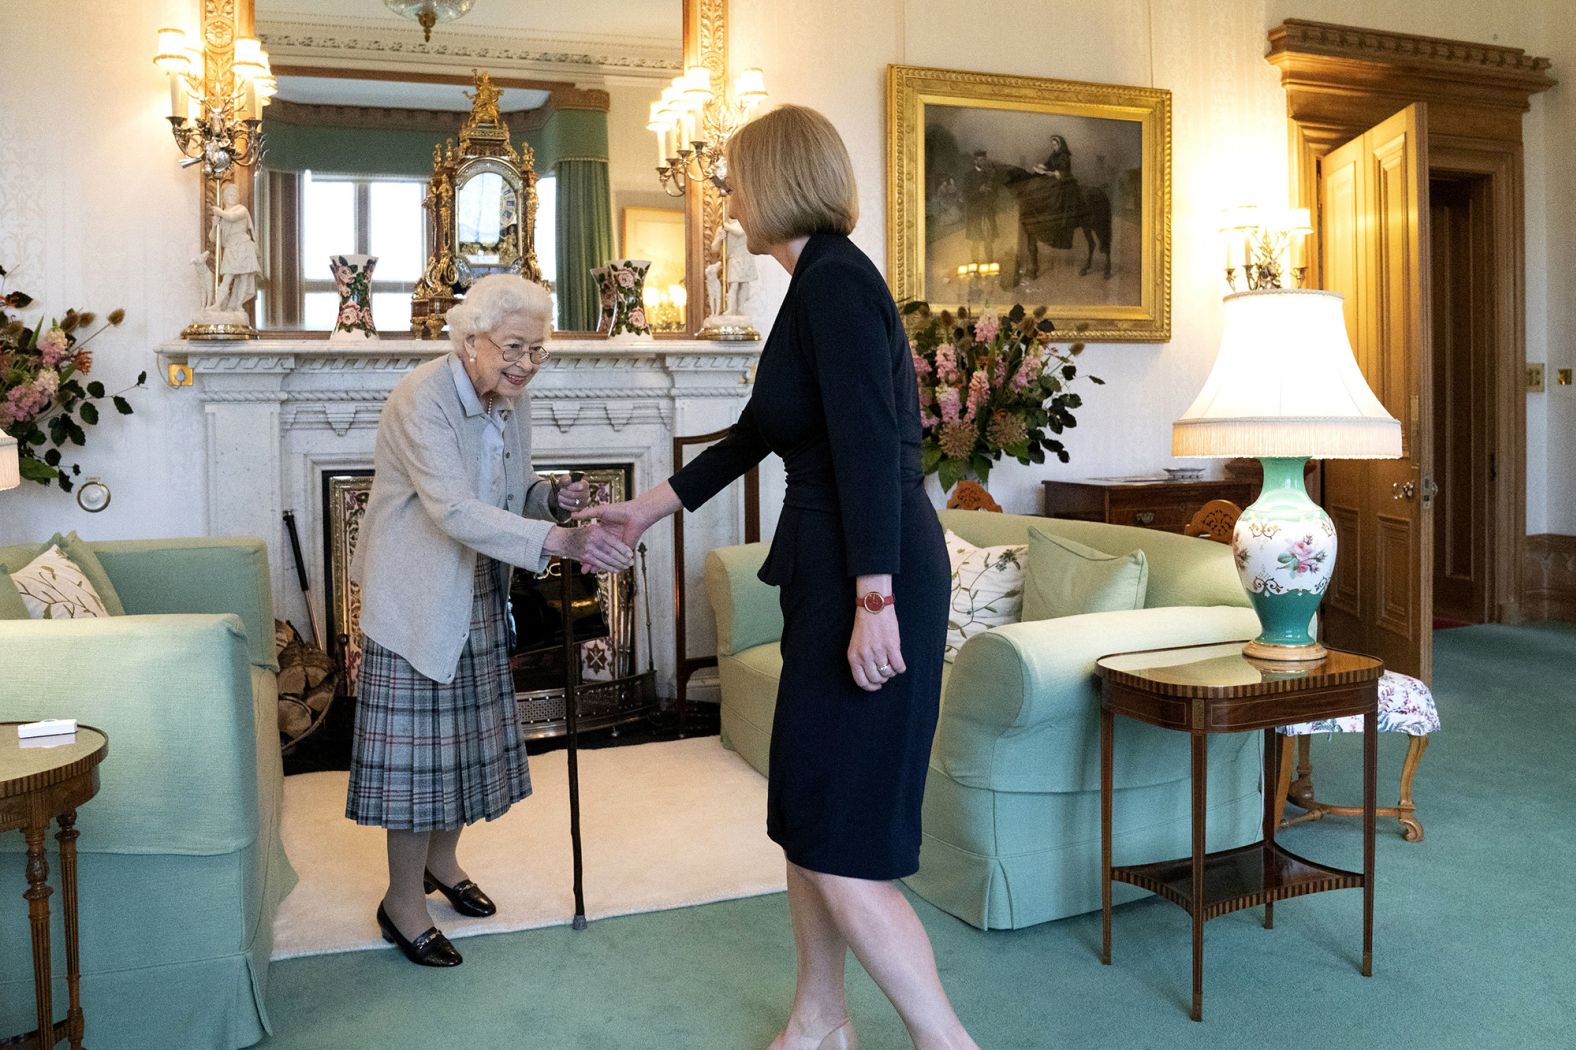 Queen Elizabeth II welcomes Truss during an audience at Balmoral Castle in Scotland, where she <a href="index.php?page=&url=https%3A%2F%2Fwww.cnn.com%2F2022%2F09%2F06%2Fuk%2Fliz-truss-officially-new-prime-minister-uk-gbr-intl%2Findex.html" target="_blank">invited Truss to form a new government.</a>